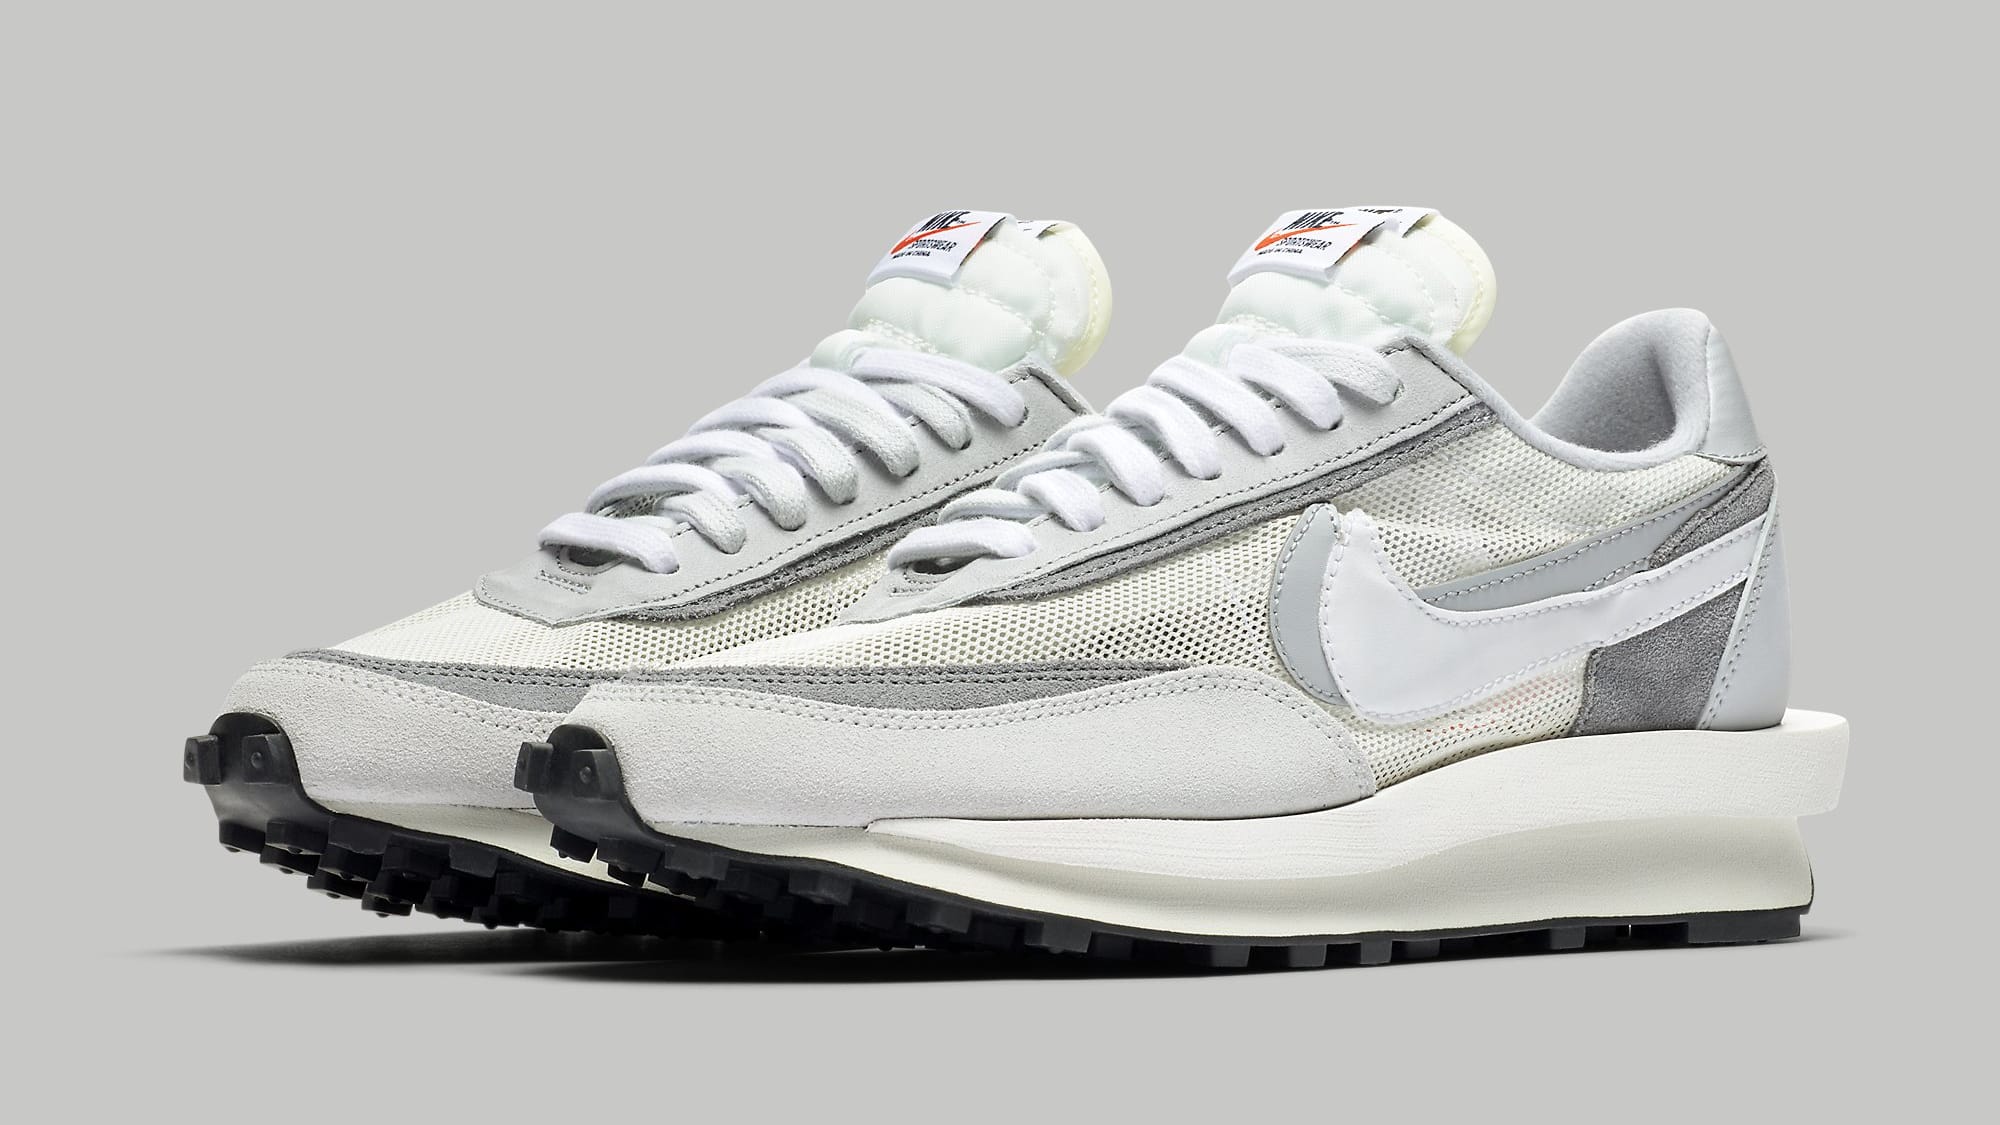 Sacai x Nike LDWaffles Releasing in Black and White | Complex